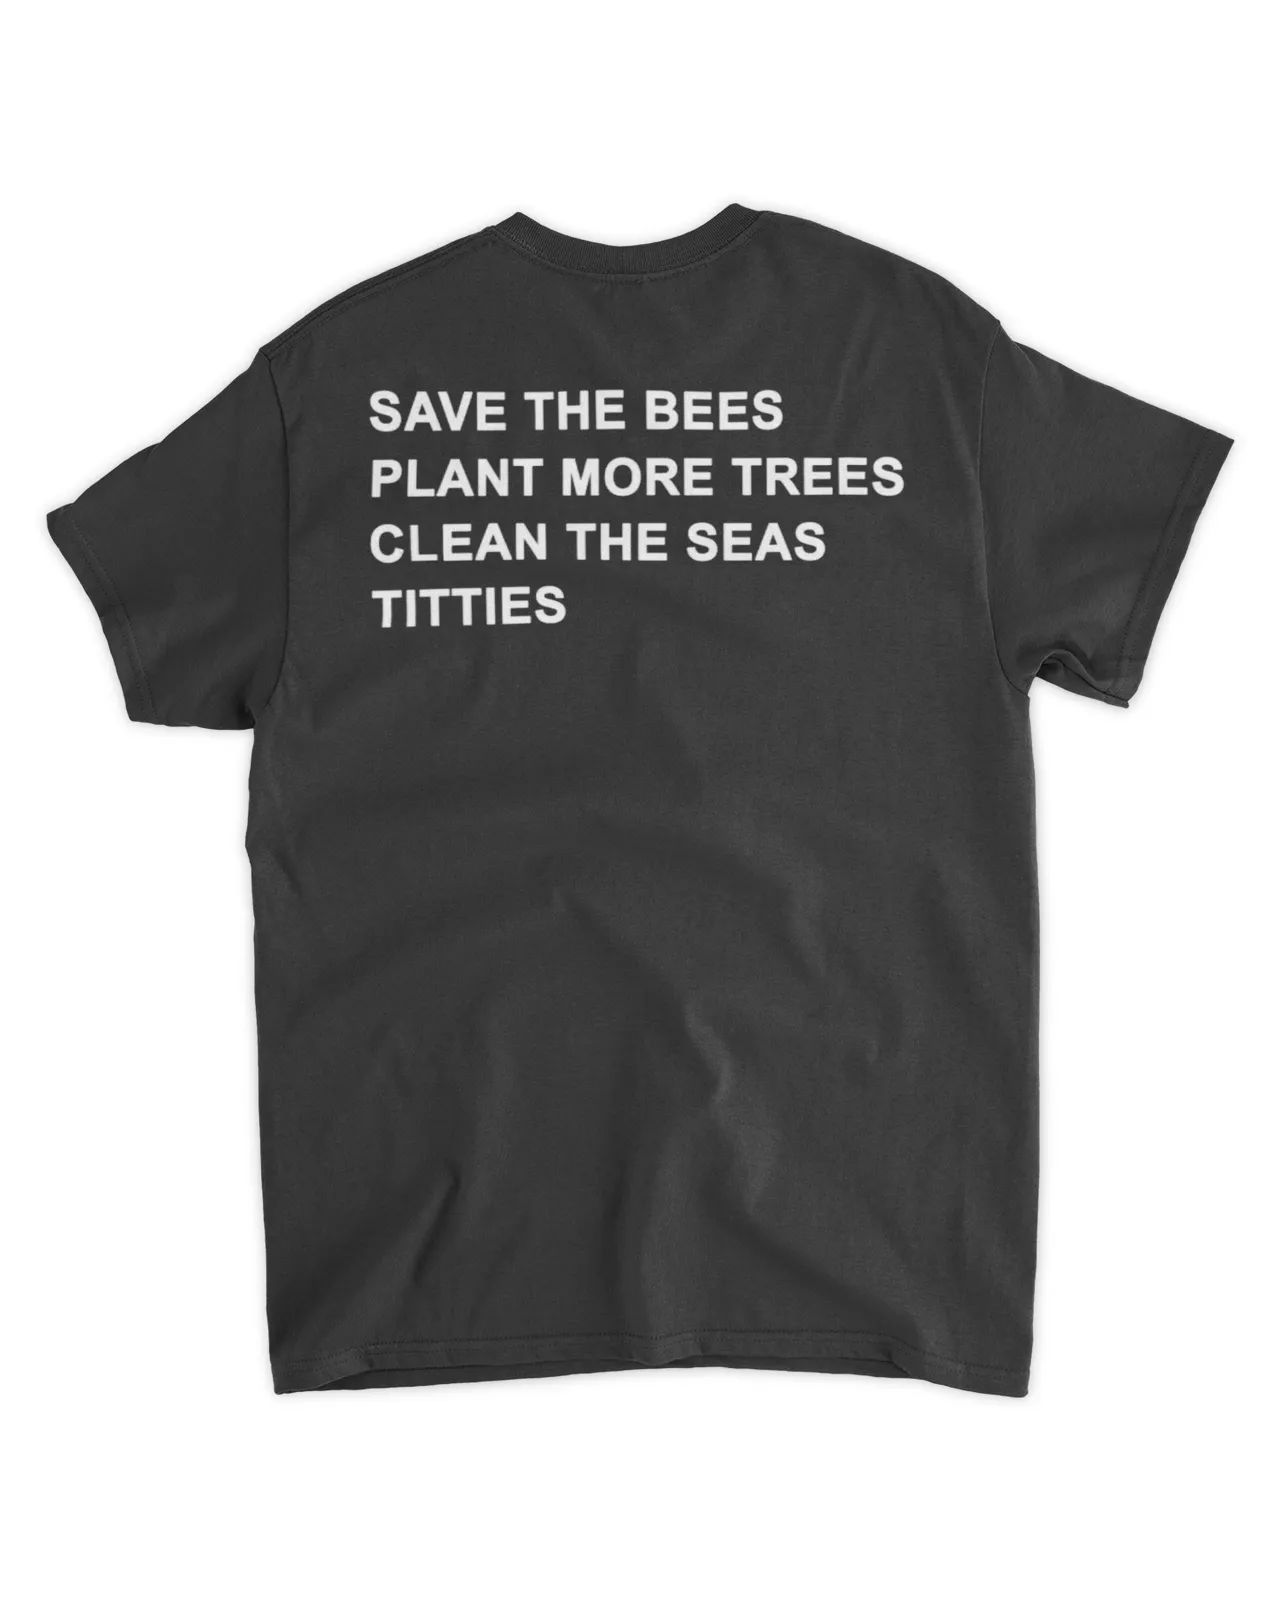  Save the bees plant more trees clean the seas titties shirt